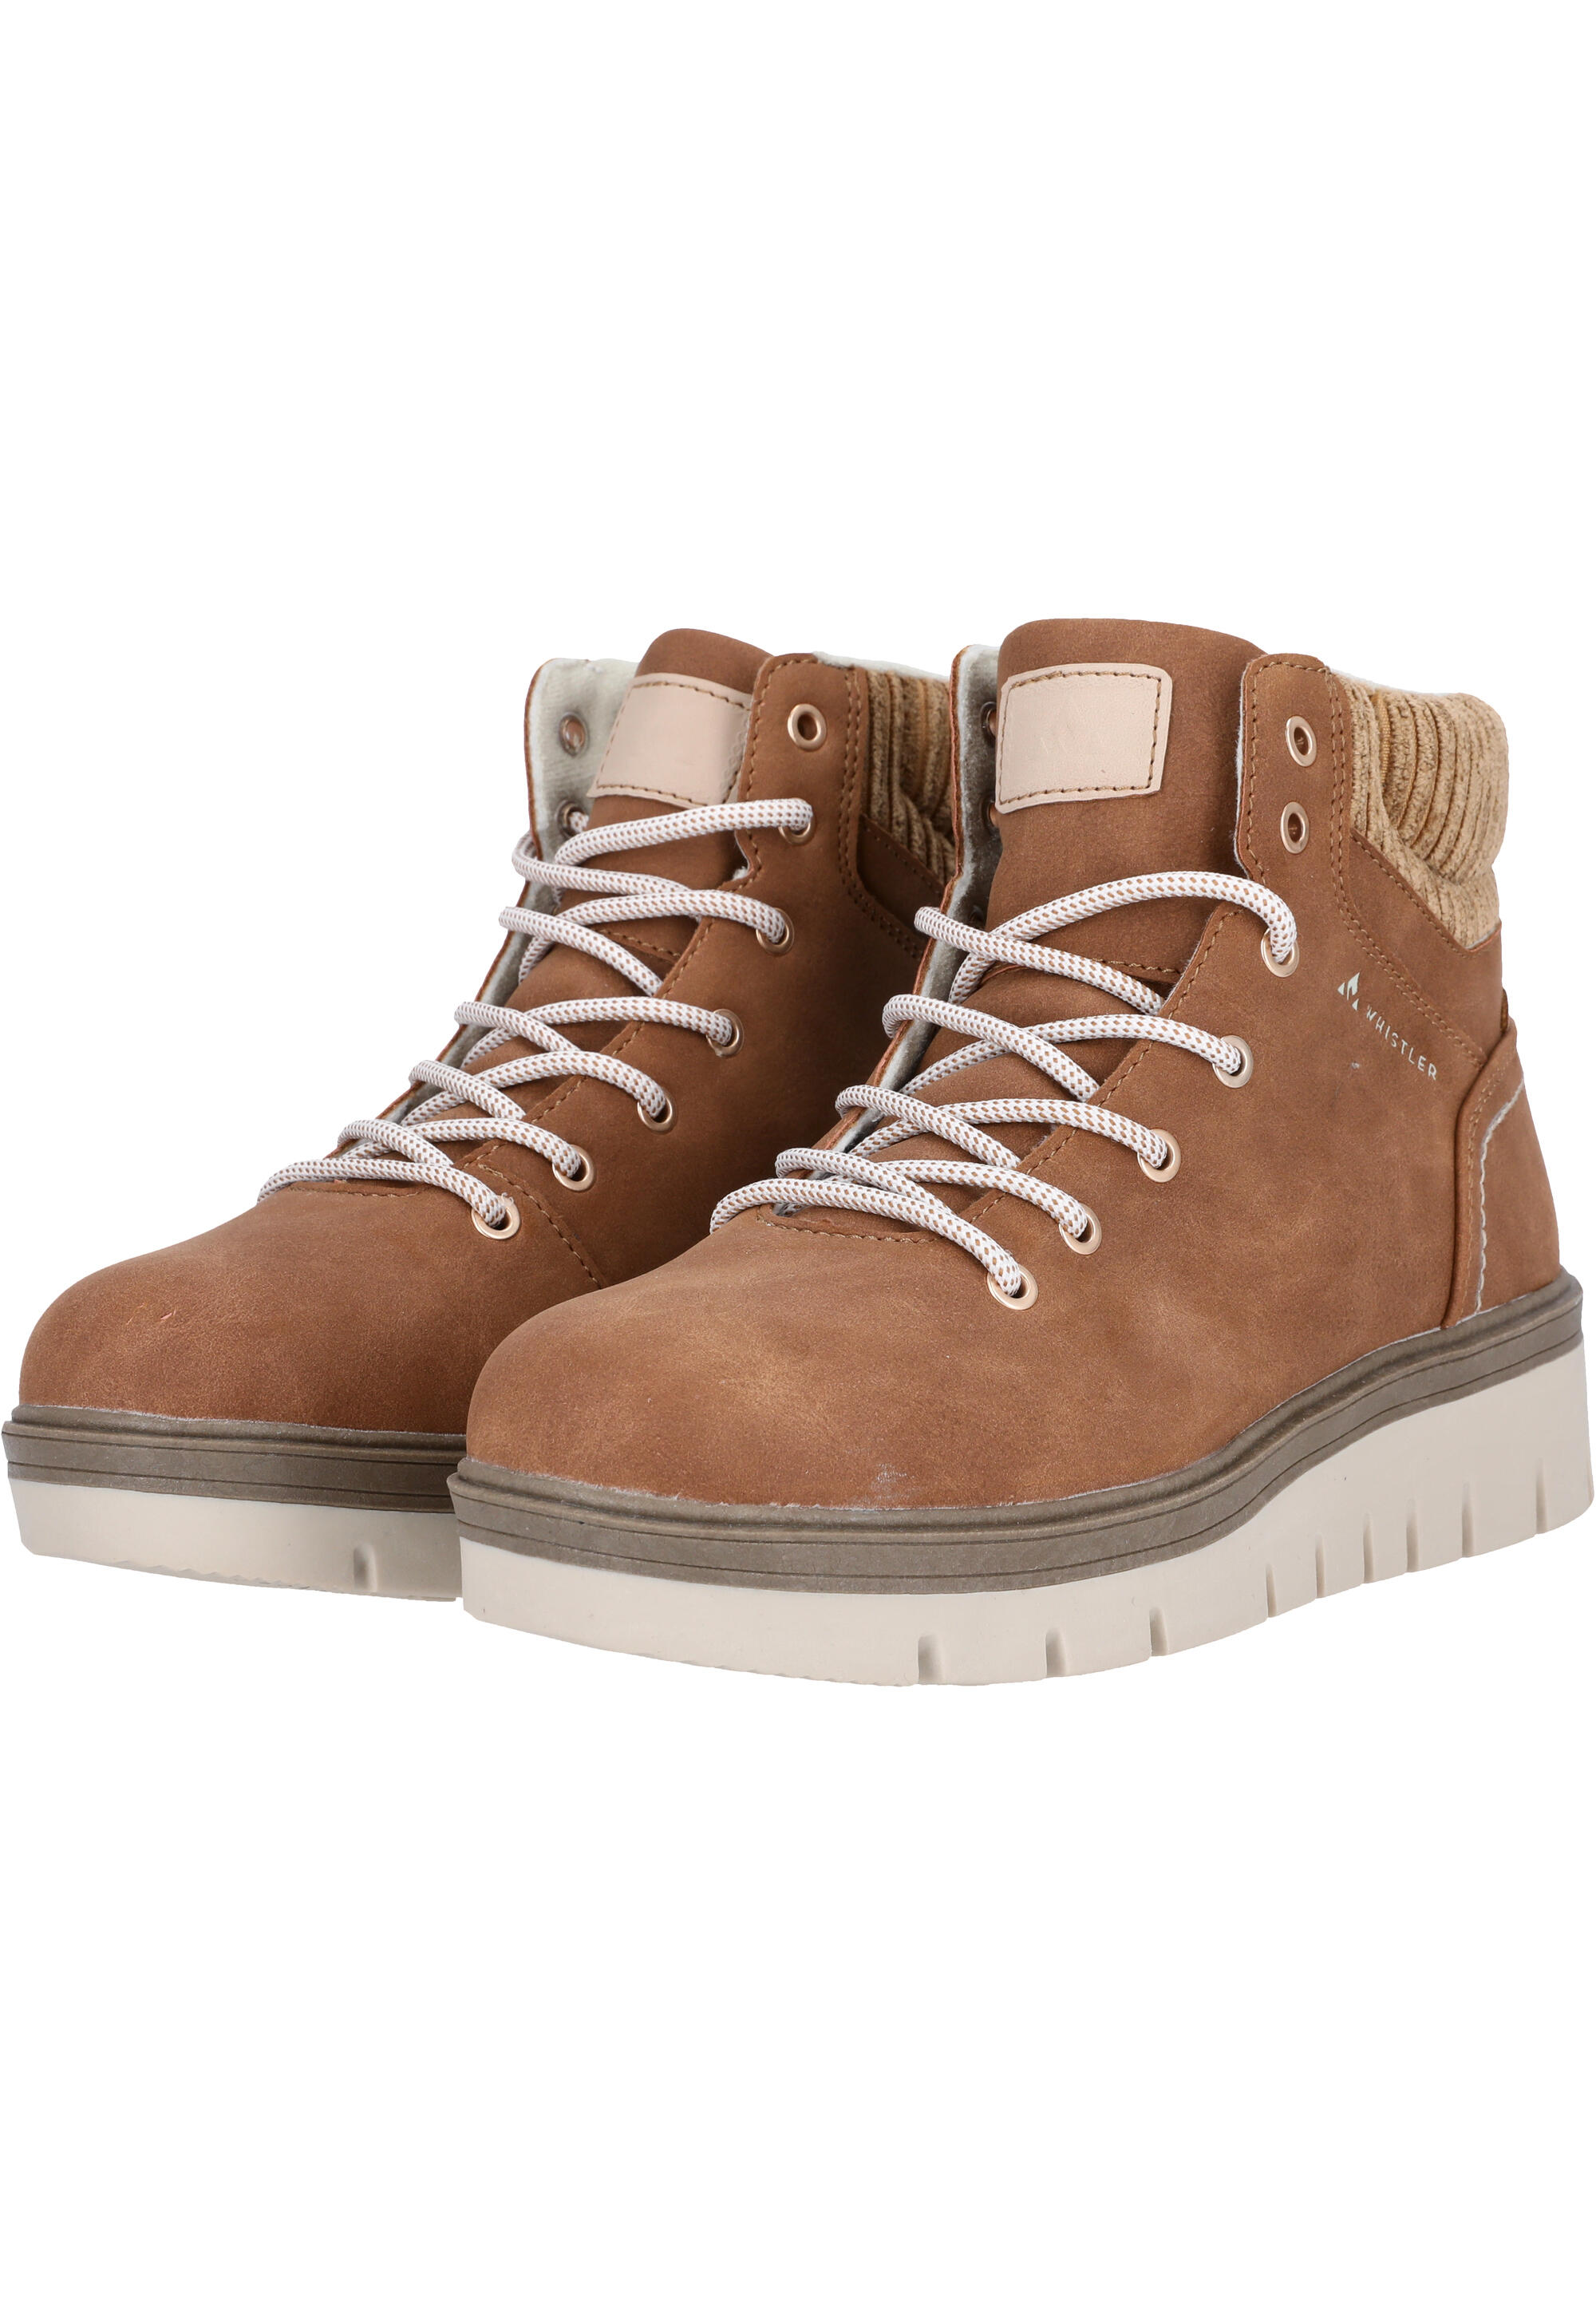 WHISTLER Chaussures d'hiver Crinta